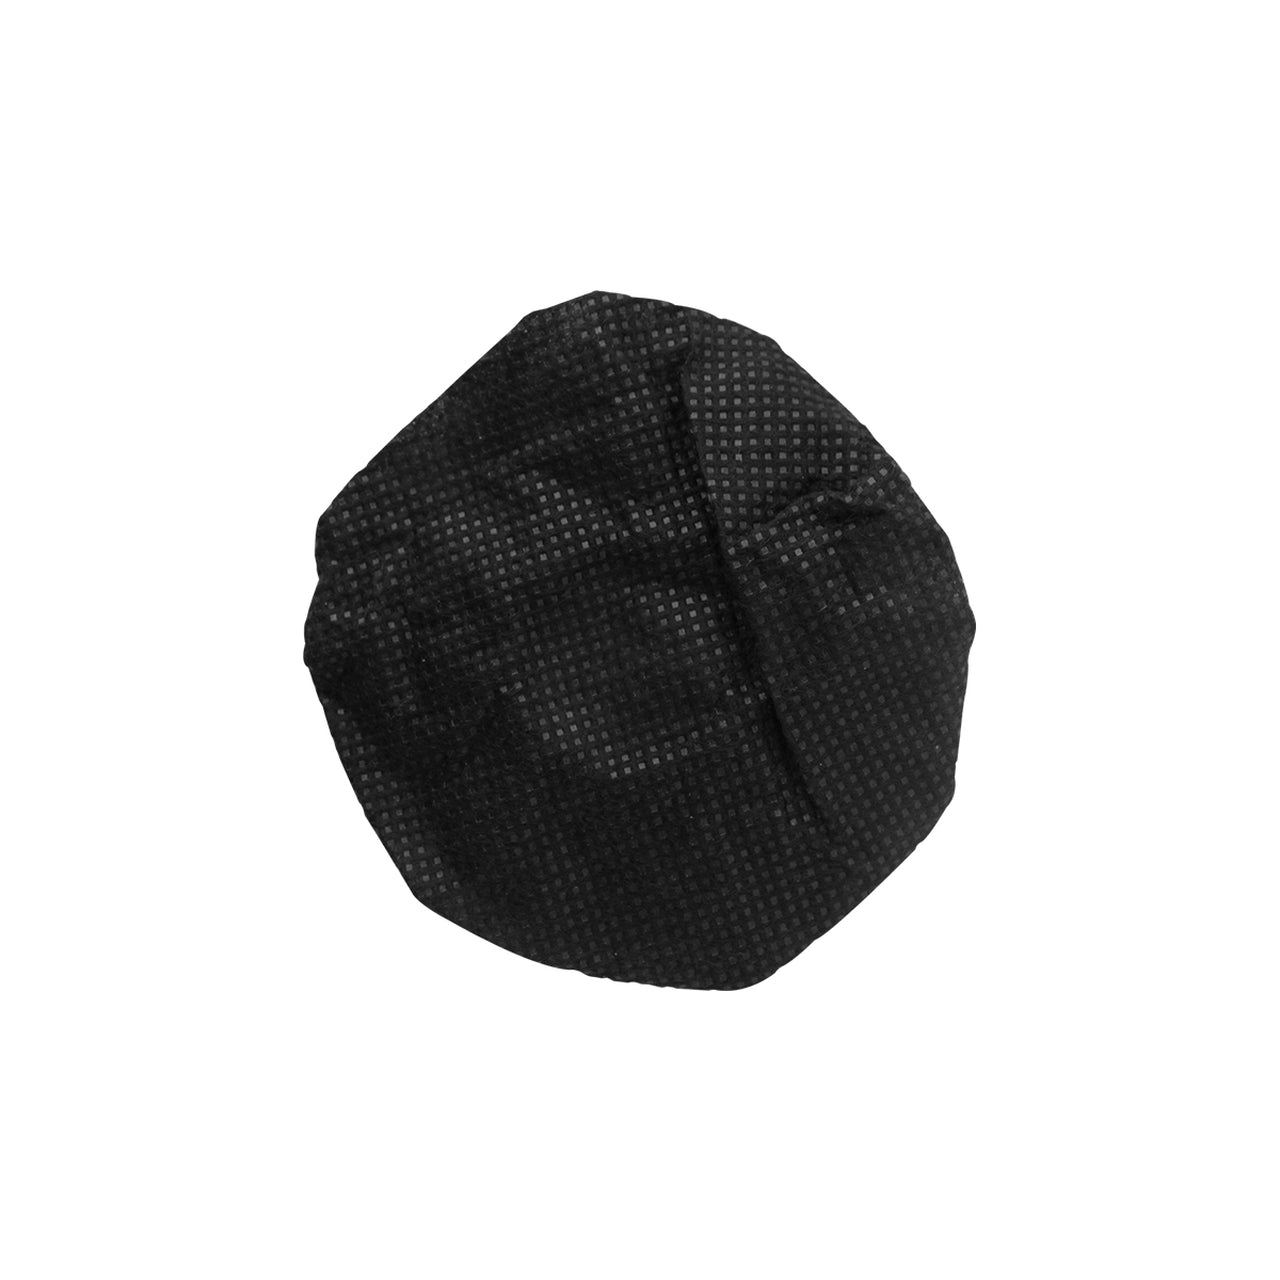 HamiltonBuhl HygenX Sanitary Disposable Microphone Covers, Black - Box of 100